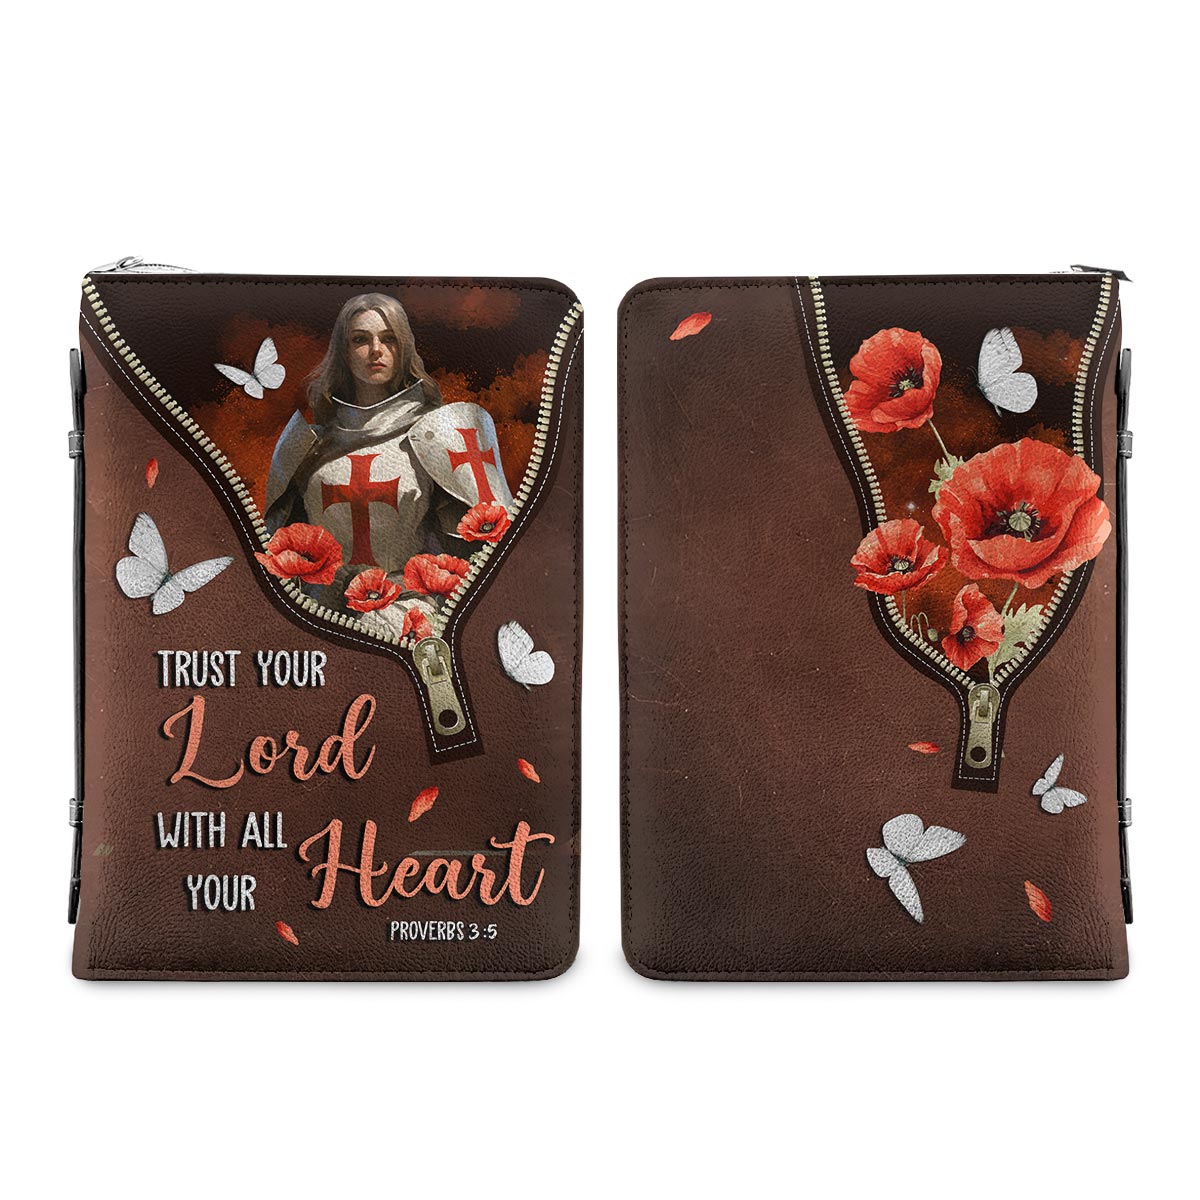 Trust Your Lord With All Your Heart Proverbs 3 5 Knights Templar Personalized Bible Cover - Christian Bible Covers For Women